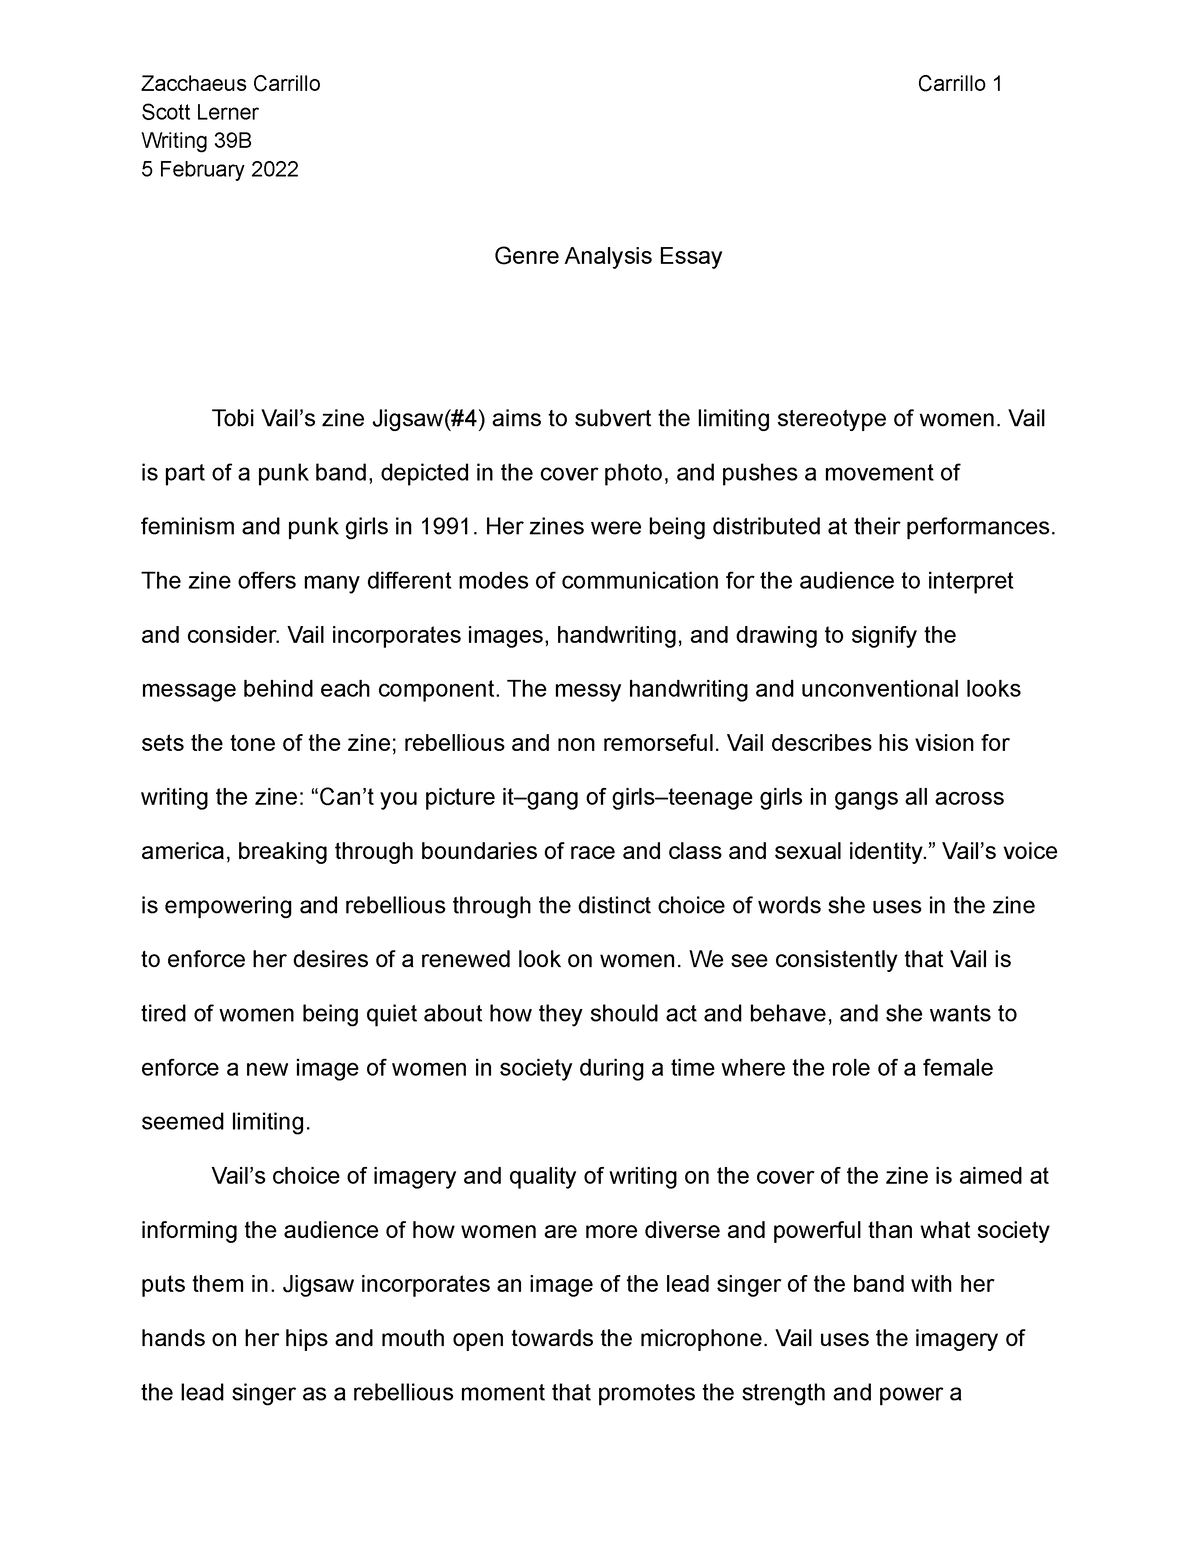 essay to compare the presentation of ideas across genres